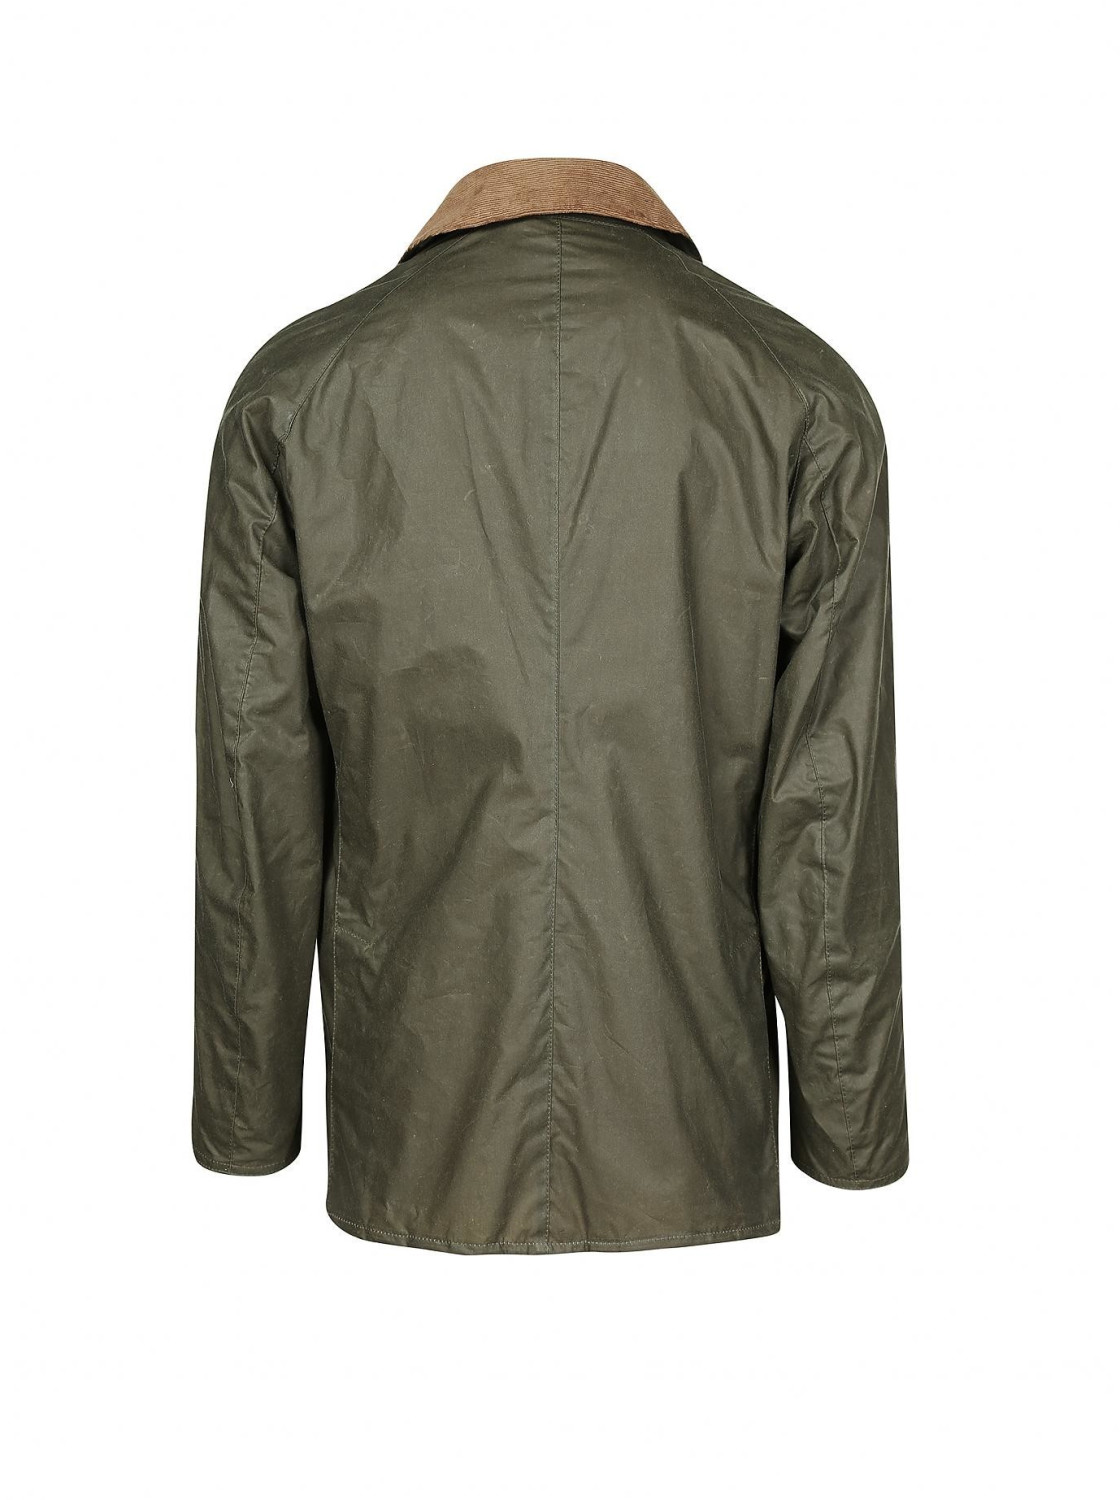 Buy Barbour Ashby Wax Jacket olive from £166.95 (Today) – Best Deals on ...